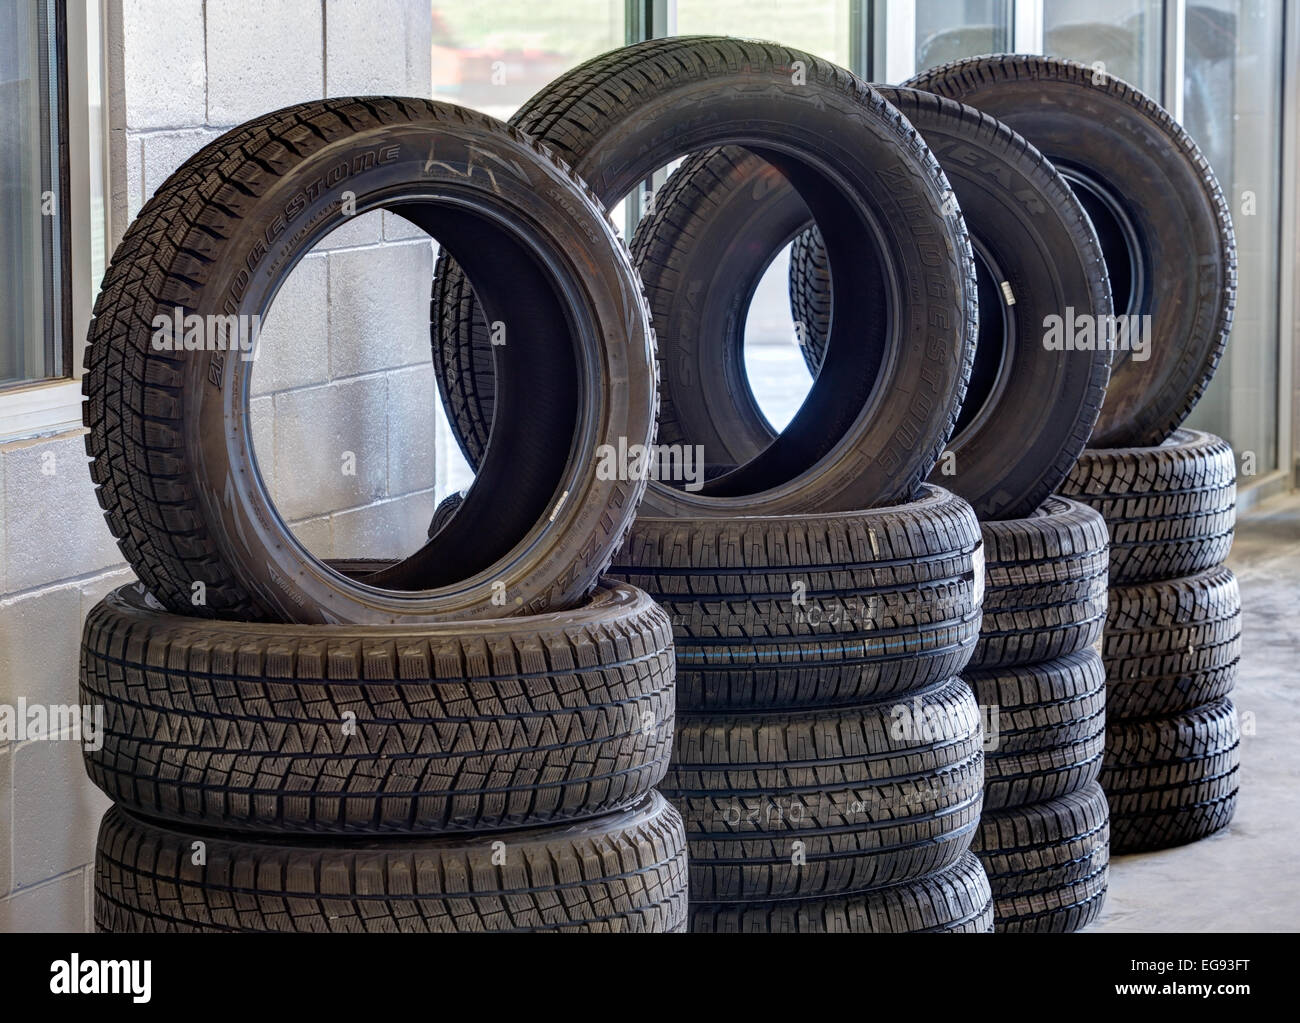 Stacks of tires, with tread patterns for various driving conditions, for sale in an automotive repair garage. Stock Photo